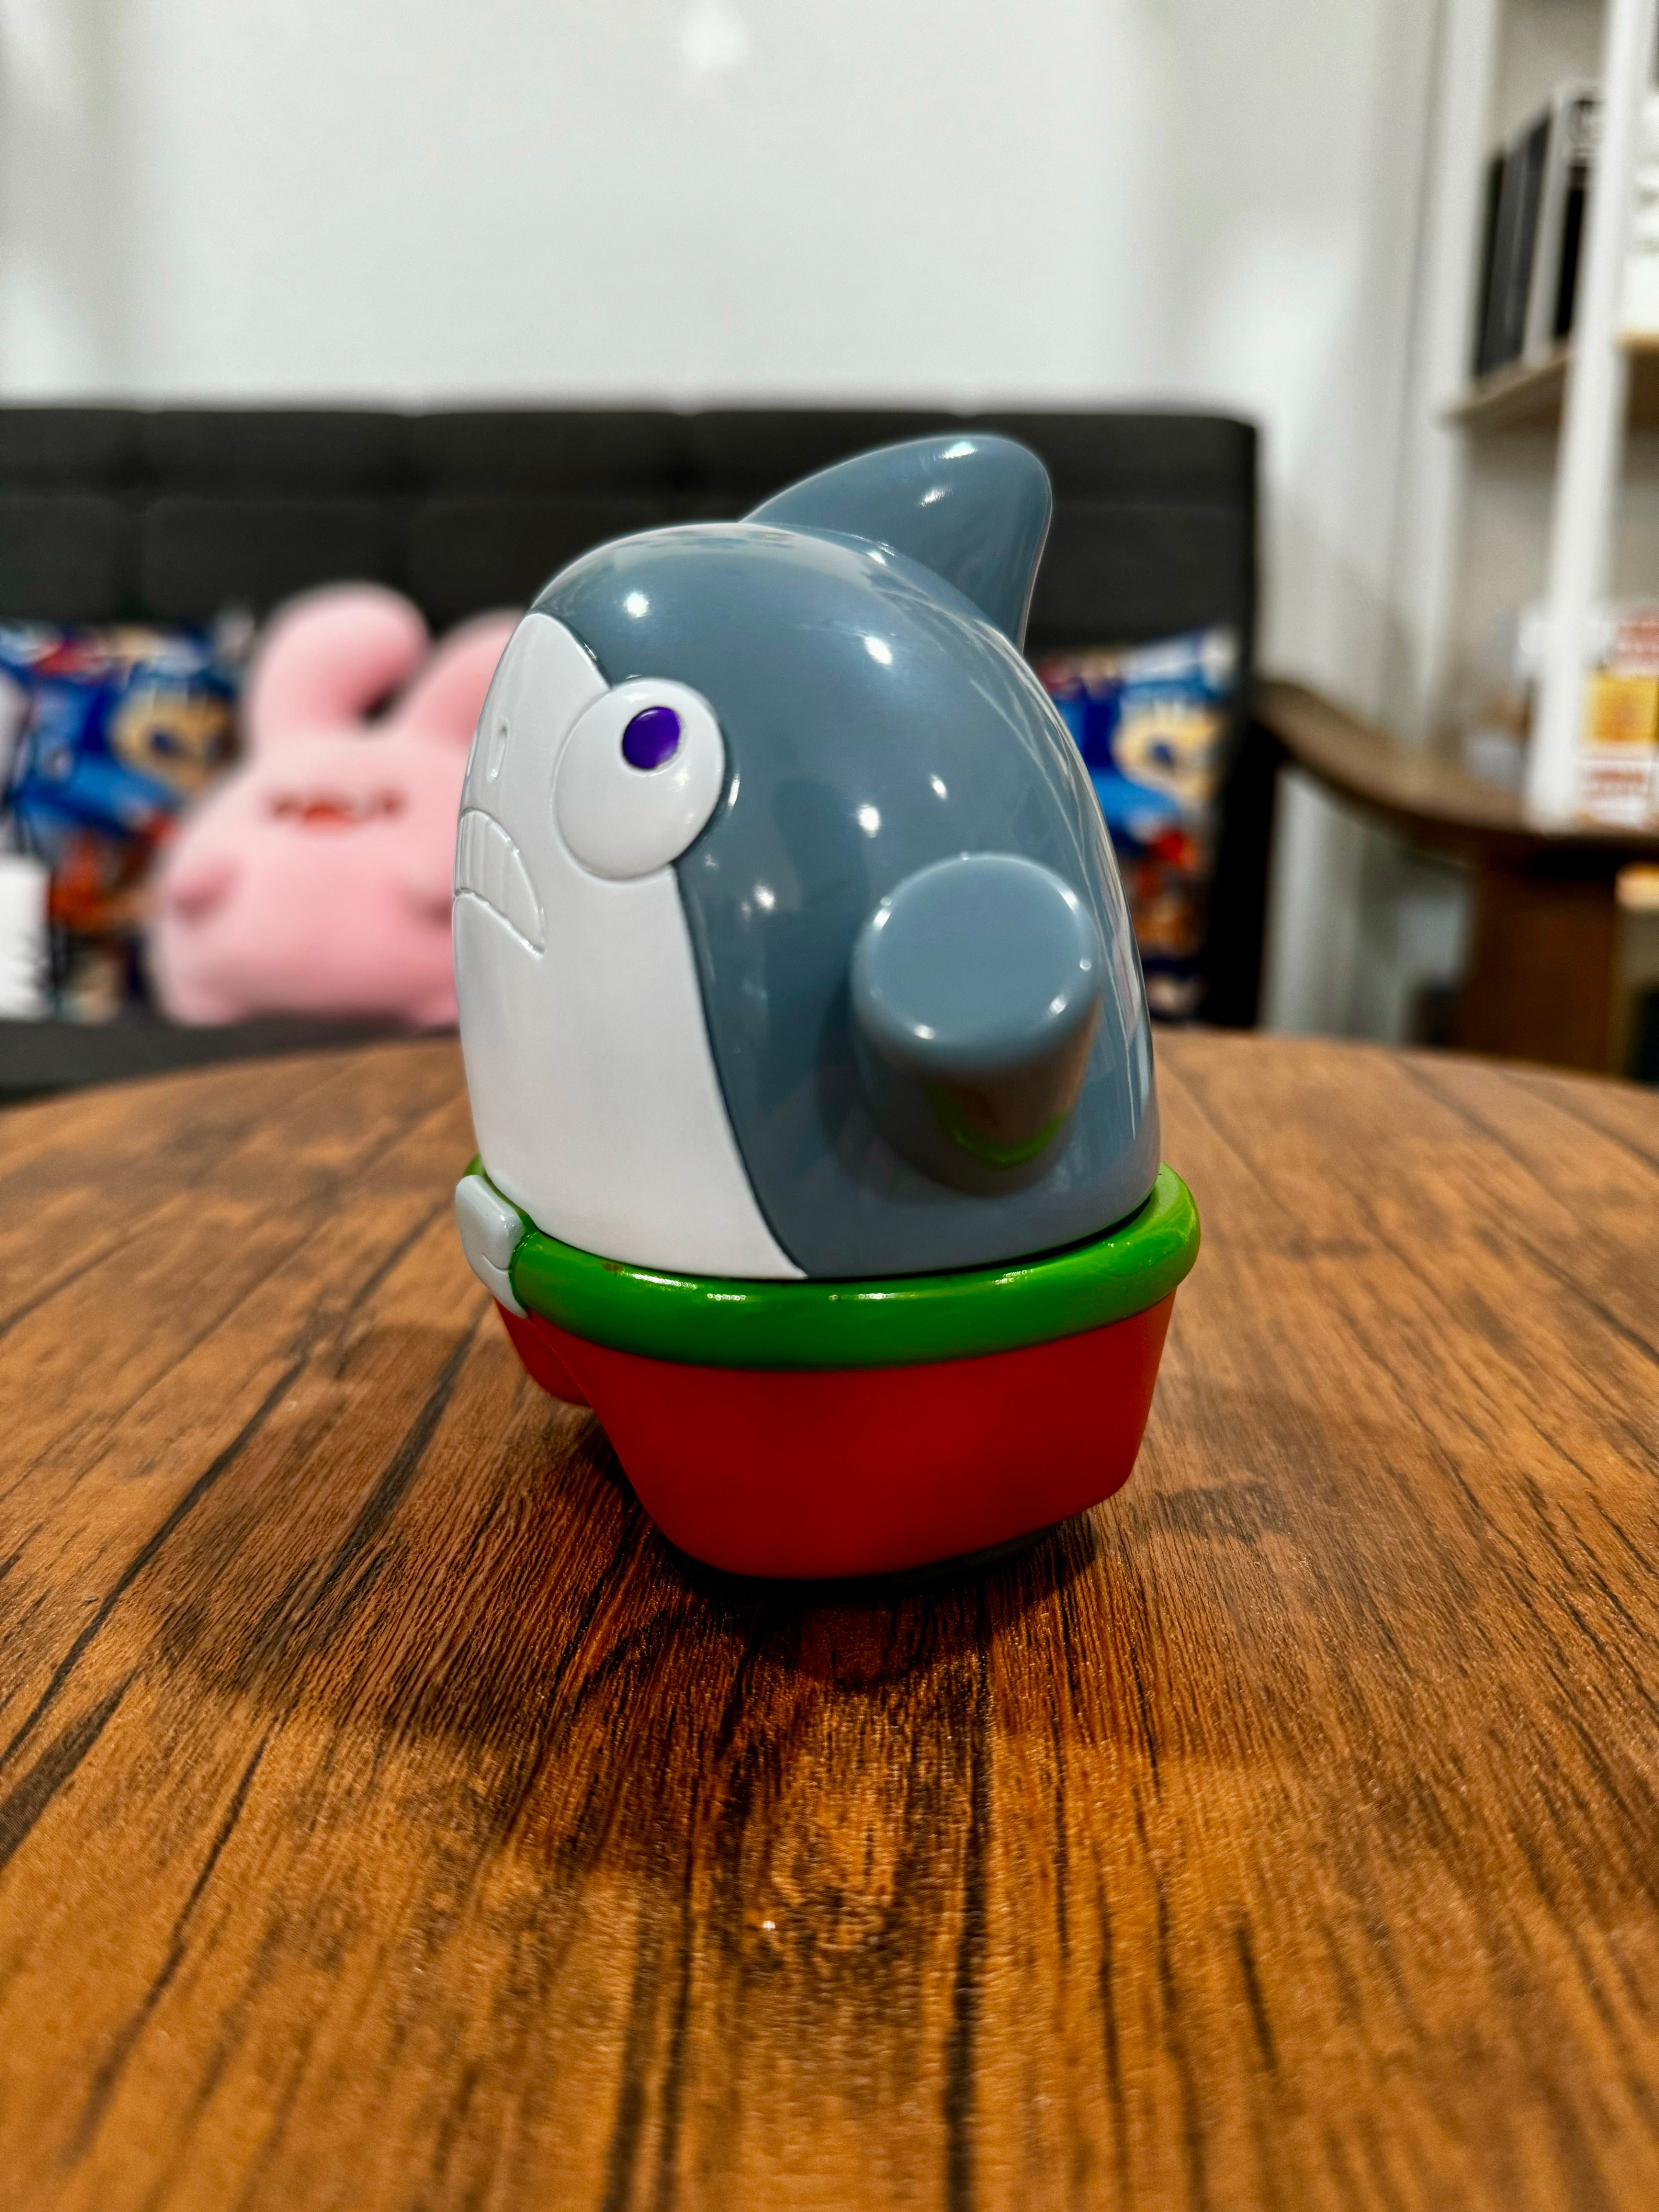 A Sofubi toy featuring SHARK Original design by CO2, 11.5cm size, on a table. Indoor, animal figure, wooden elements visible. From Strangecat Toys, a blind box and art toy store.